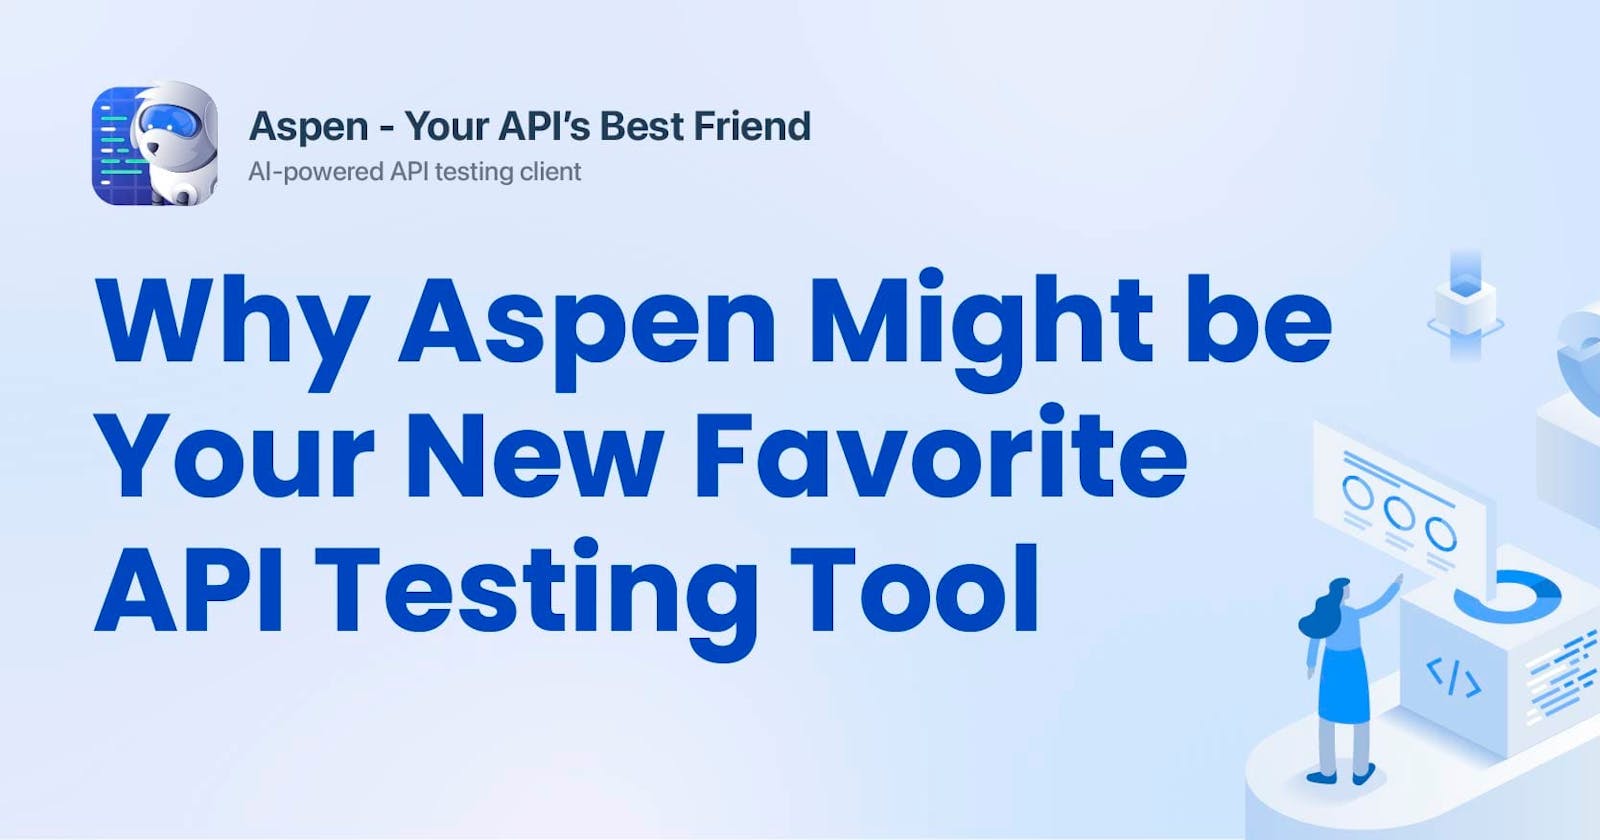 Why Aspen Might Be Your New Favorite API Testing Tool